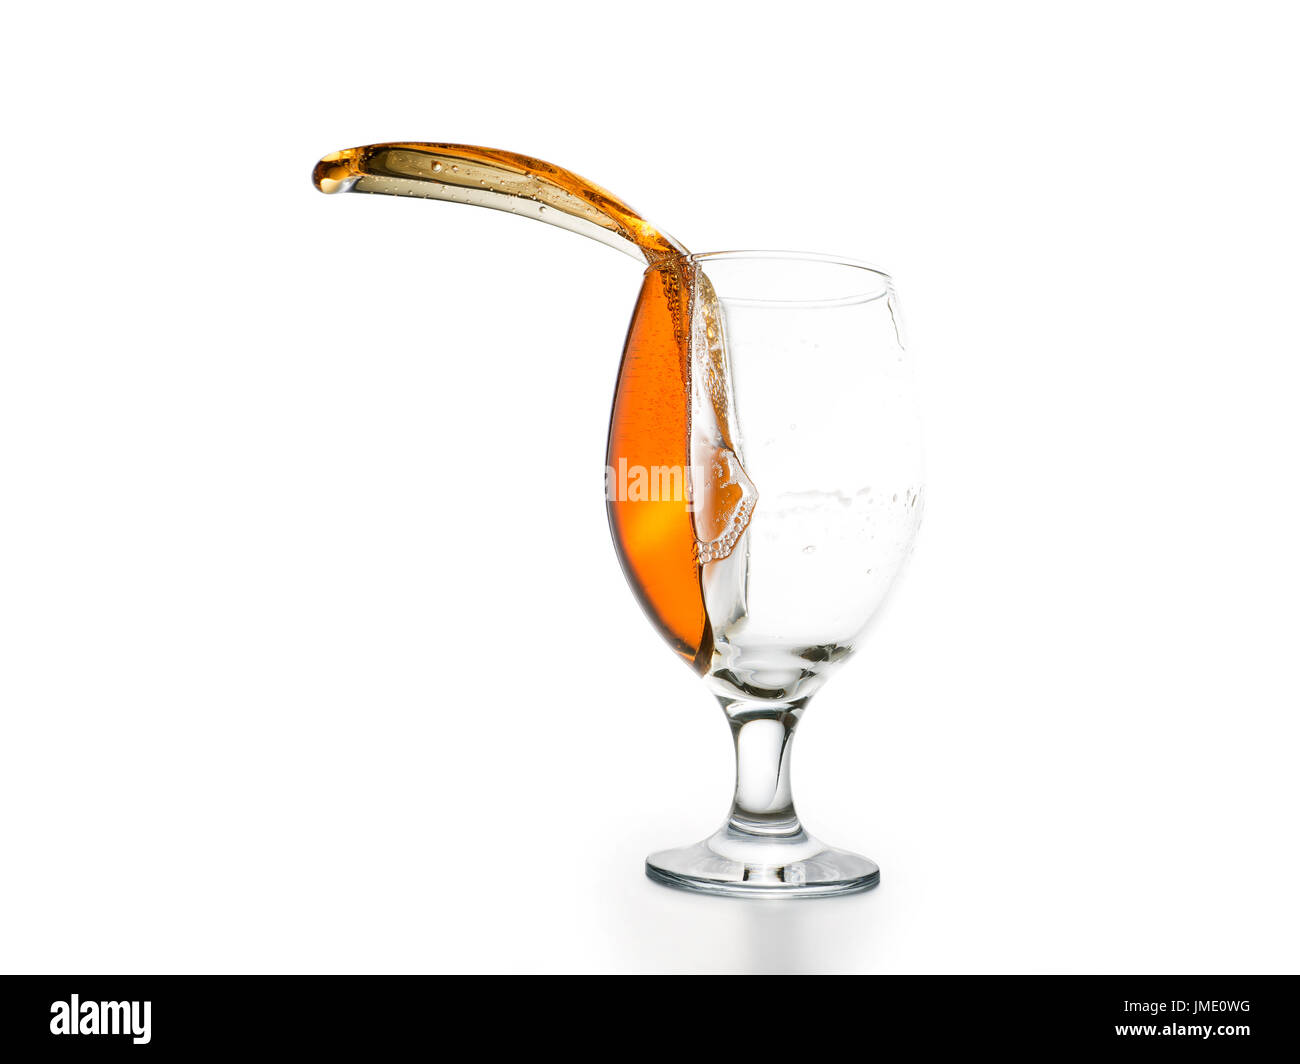 Download Splashing Golden Beer In The Glass Isolated In White Clipping Path Stock Photo Alamy Yellowimages Mockups